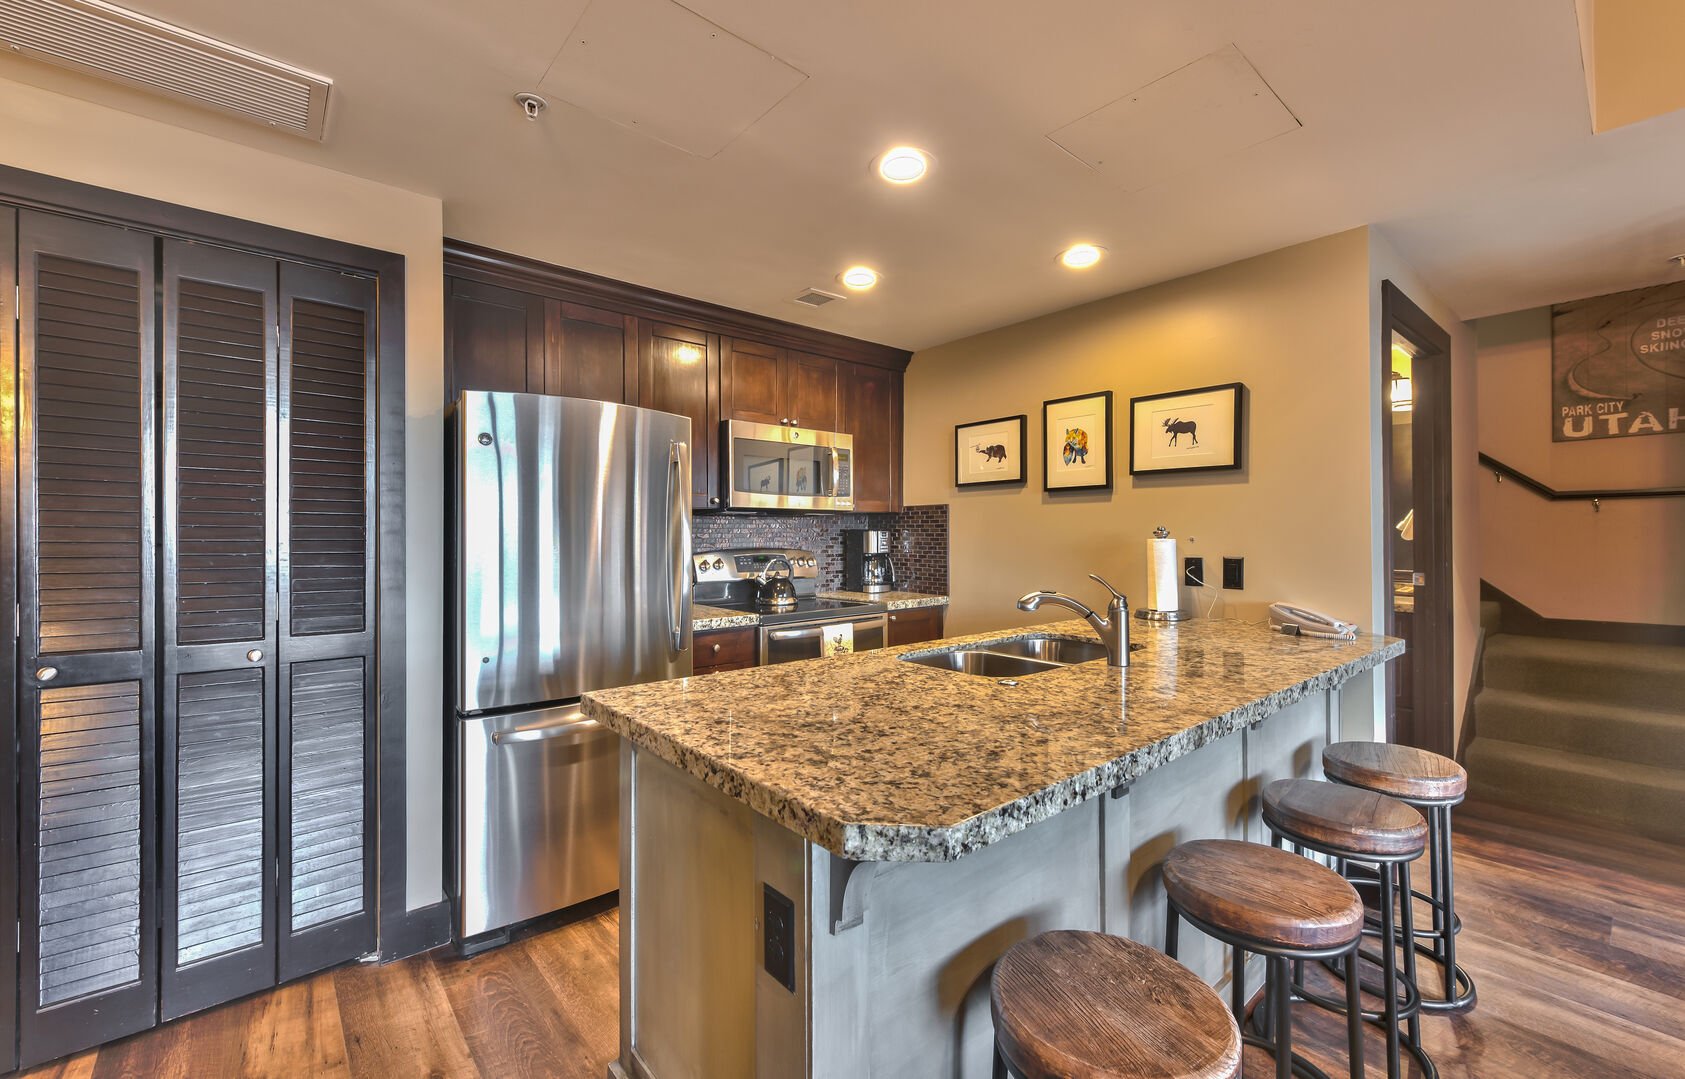 Kitchen features granite and stainless